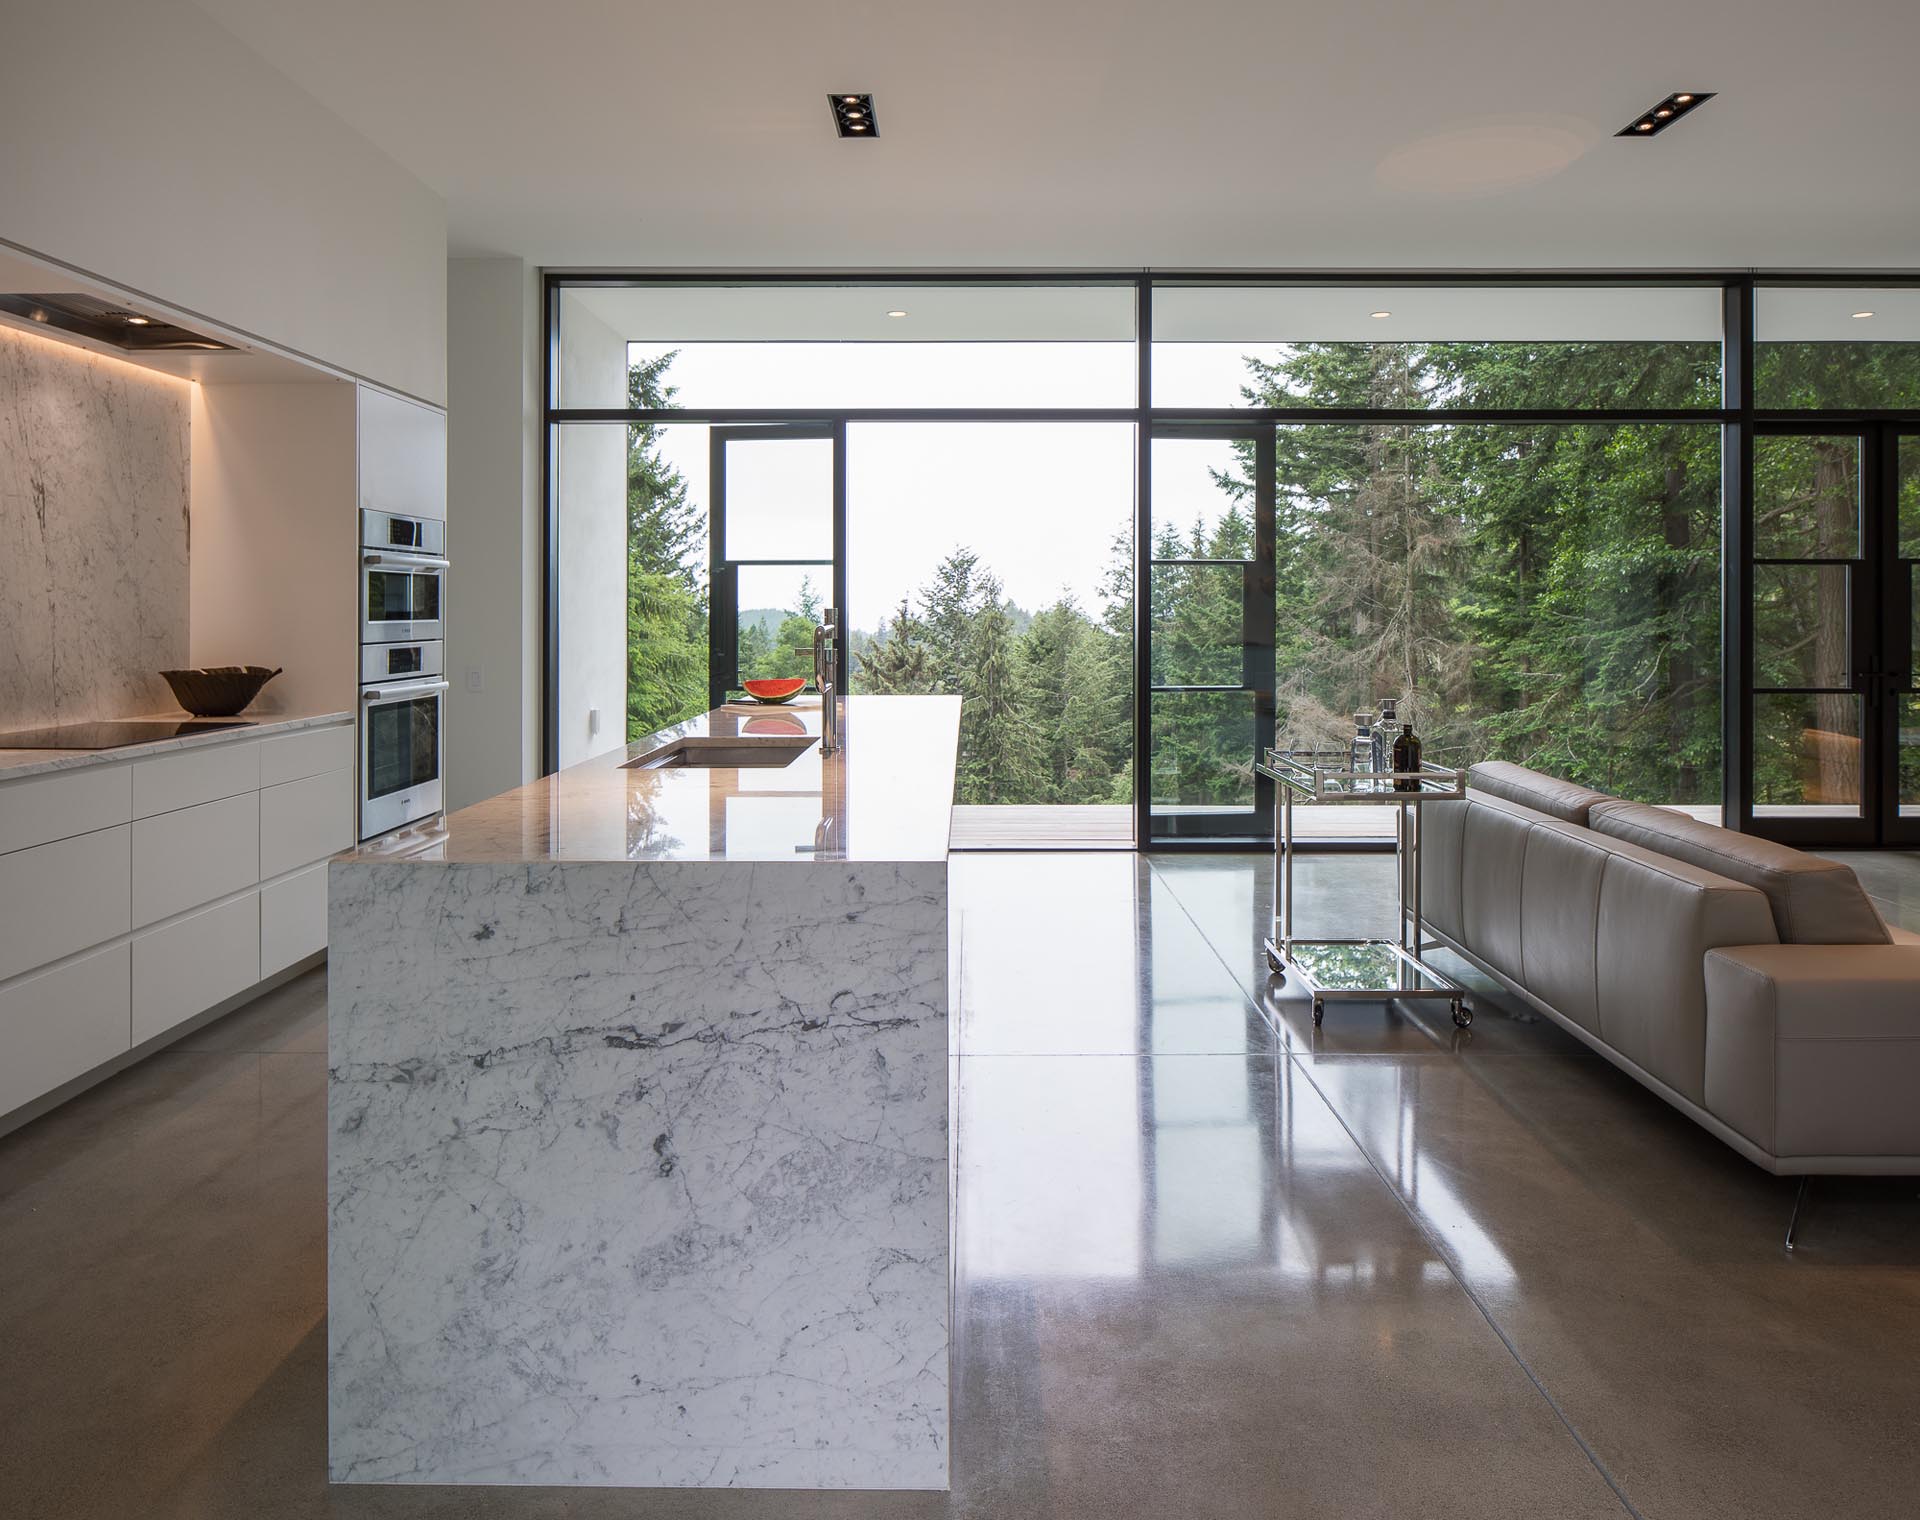 A modern kitchen with minimalist white cabinets, Carrera marble countertops, and gray concrete flooring.